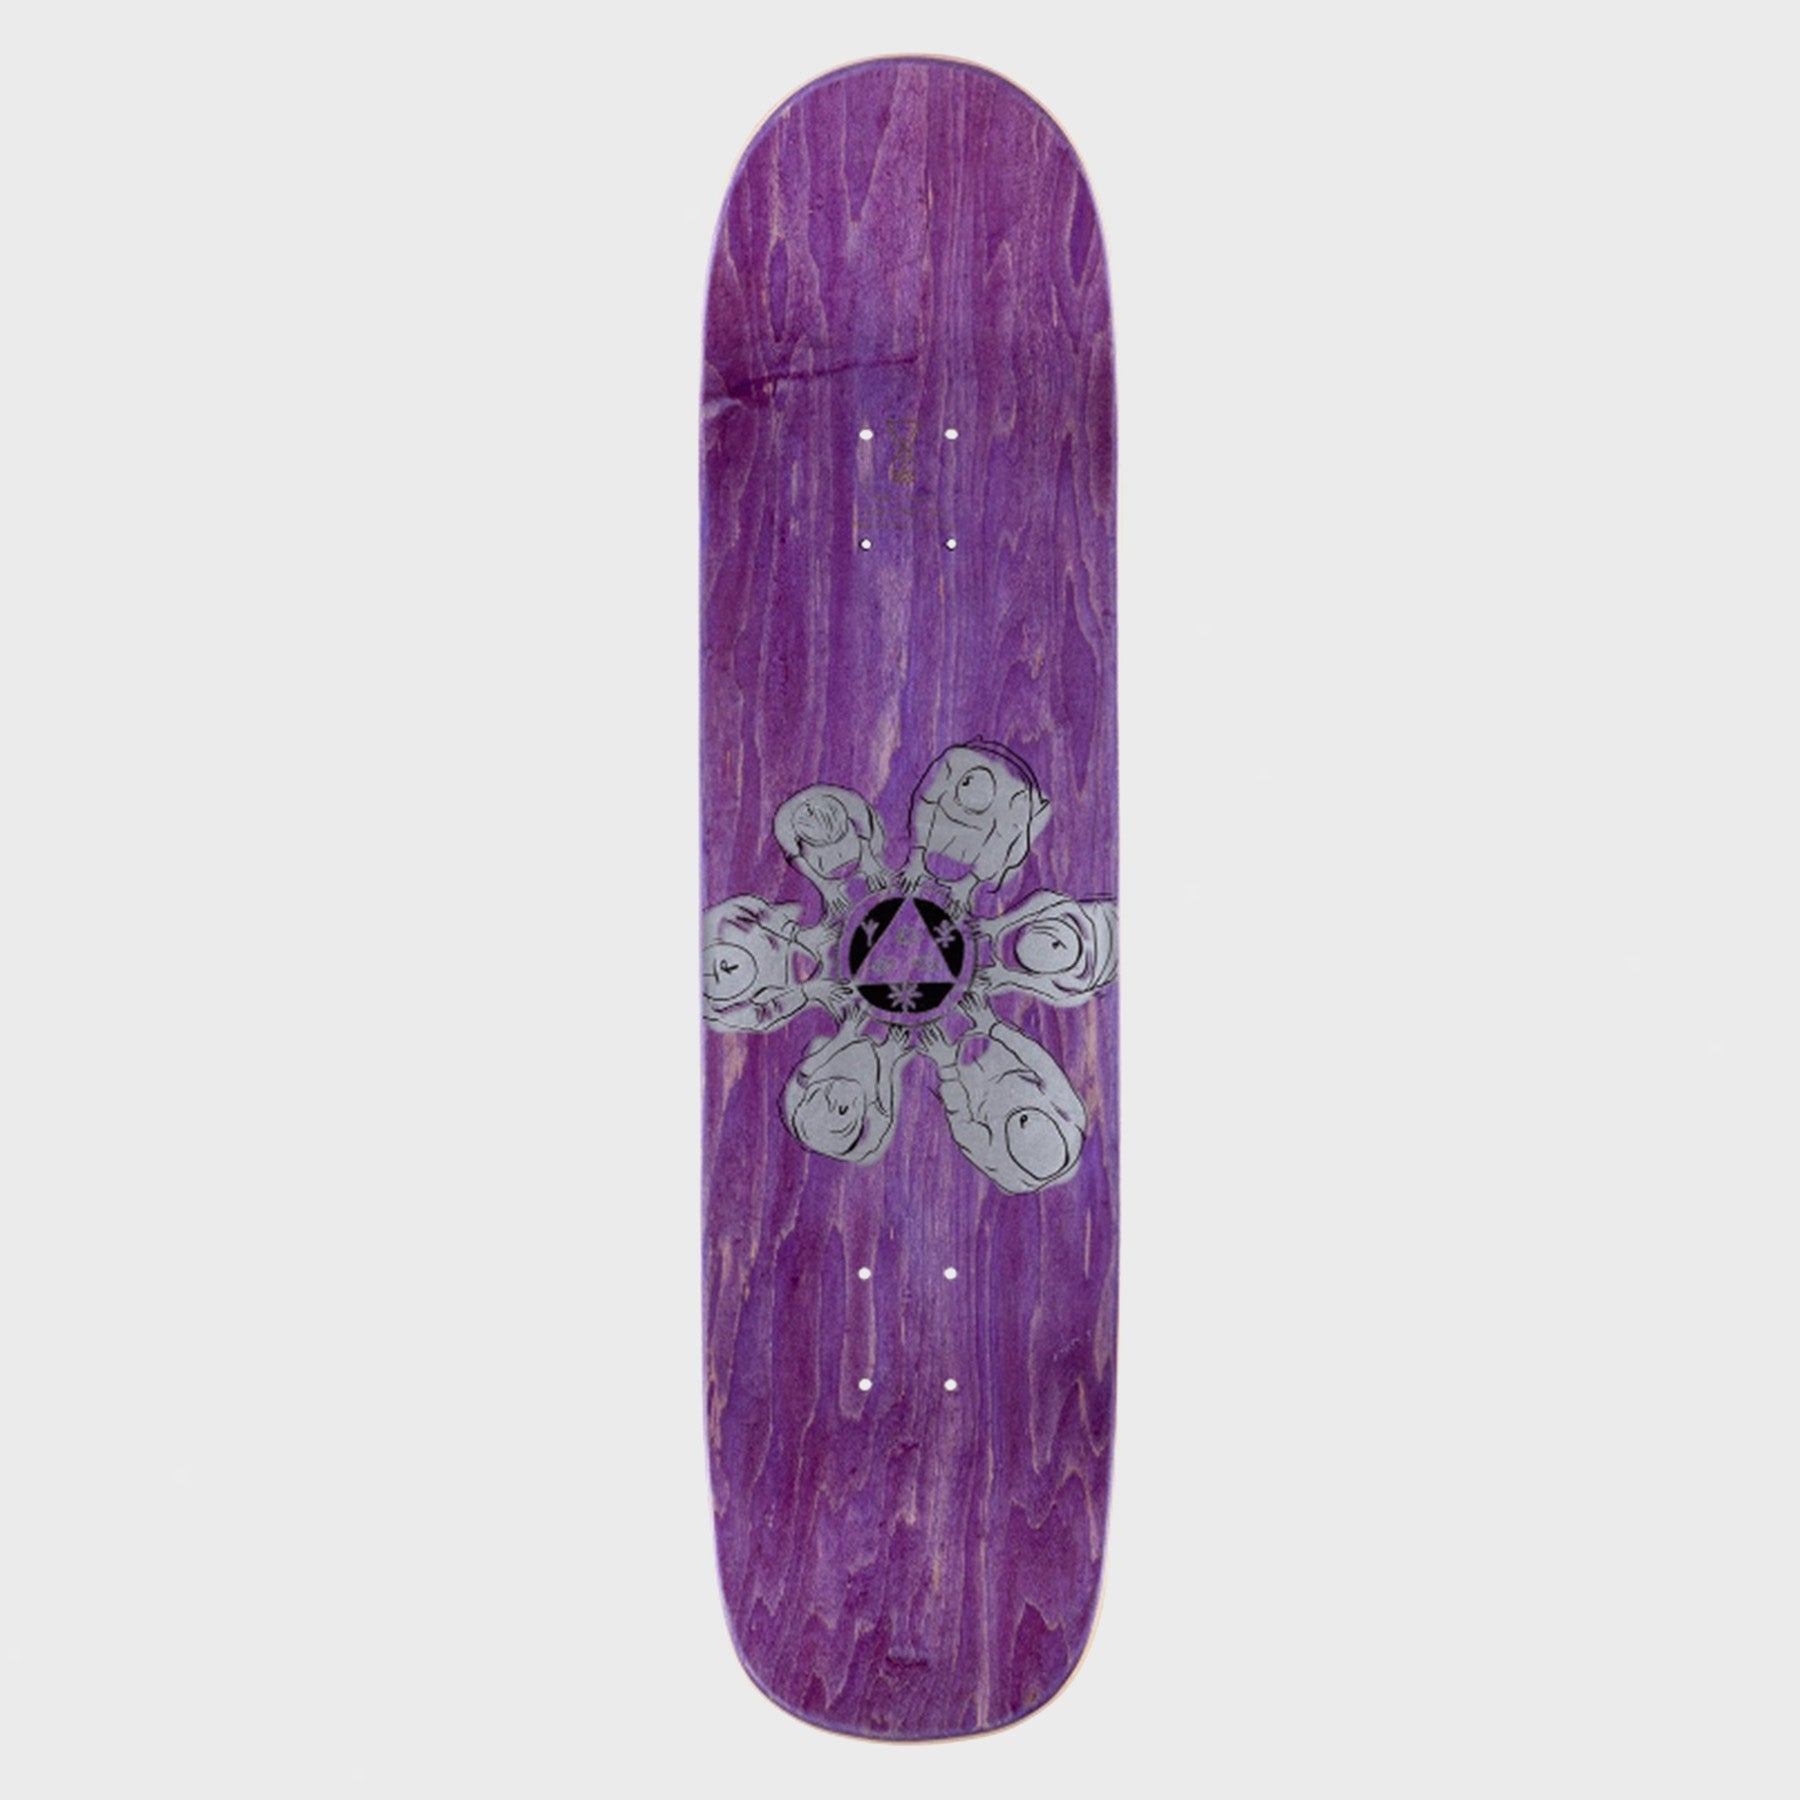 Welcome Skateboards - 8.0" Hooter Shooter on Bunyip Deck (Various Stains)